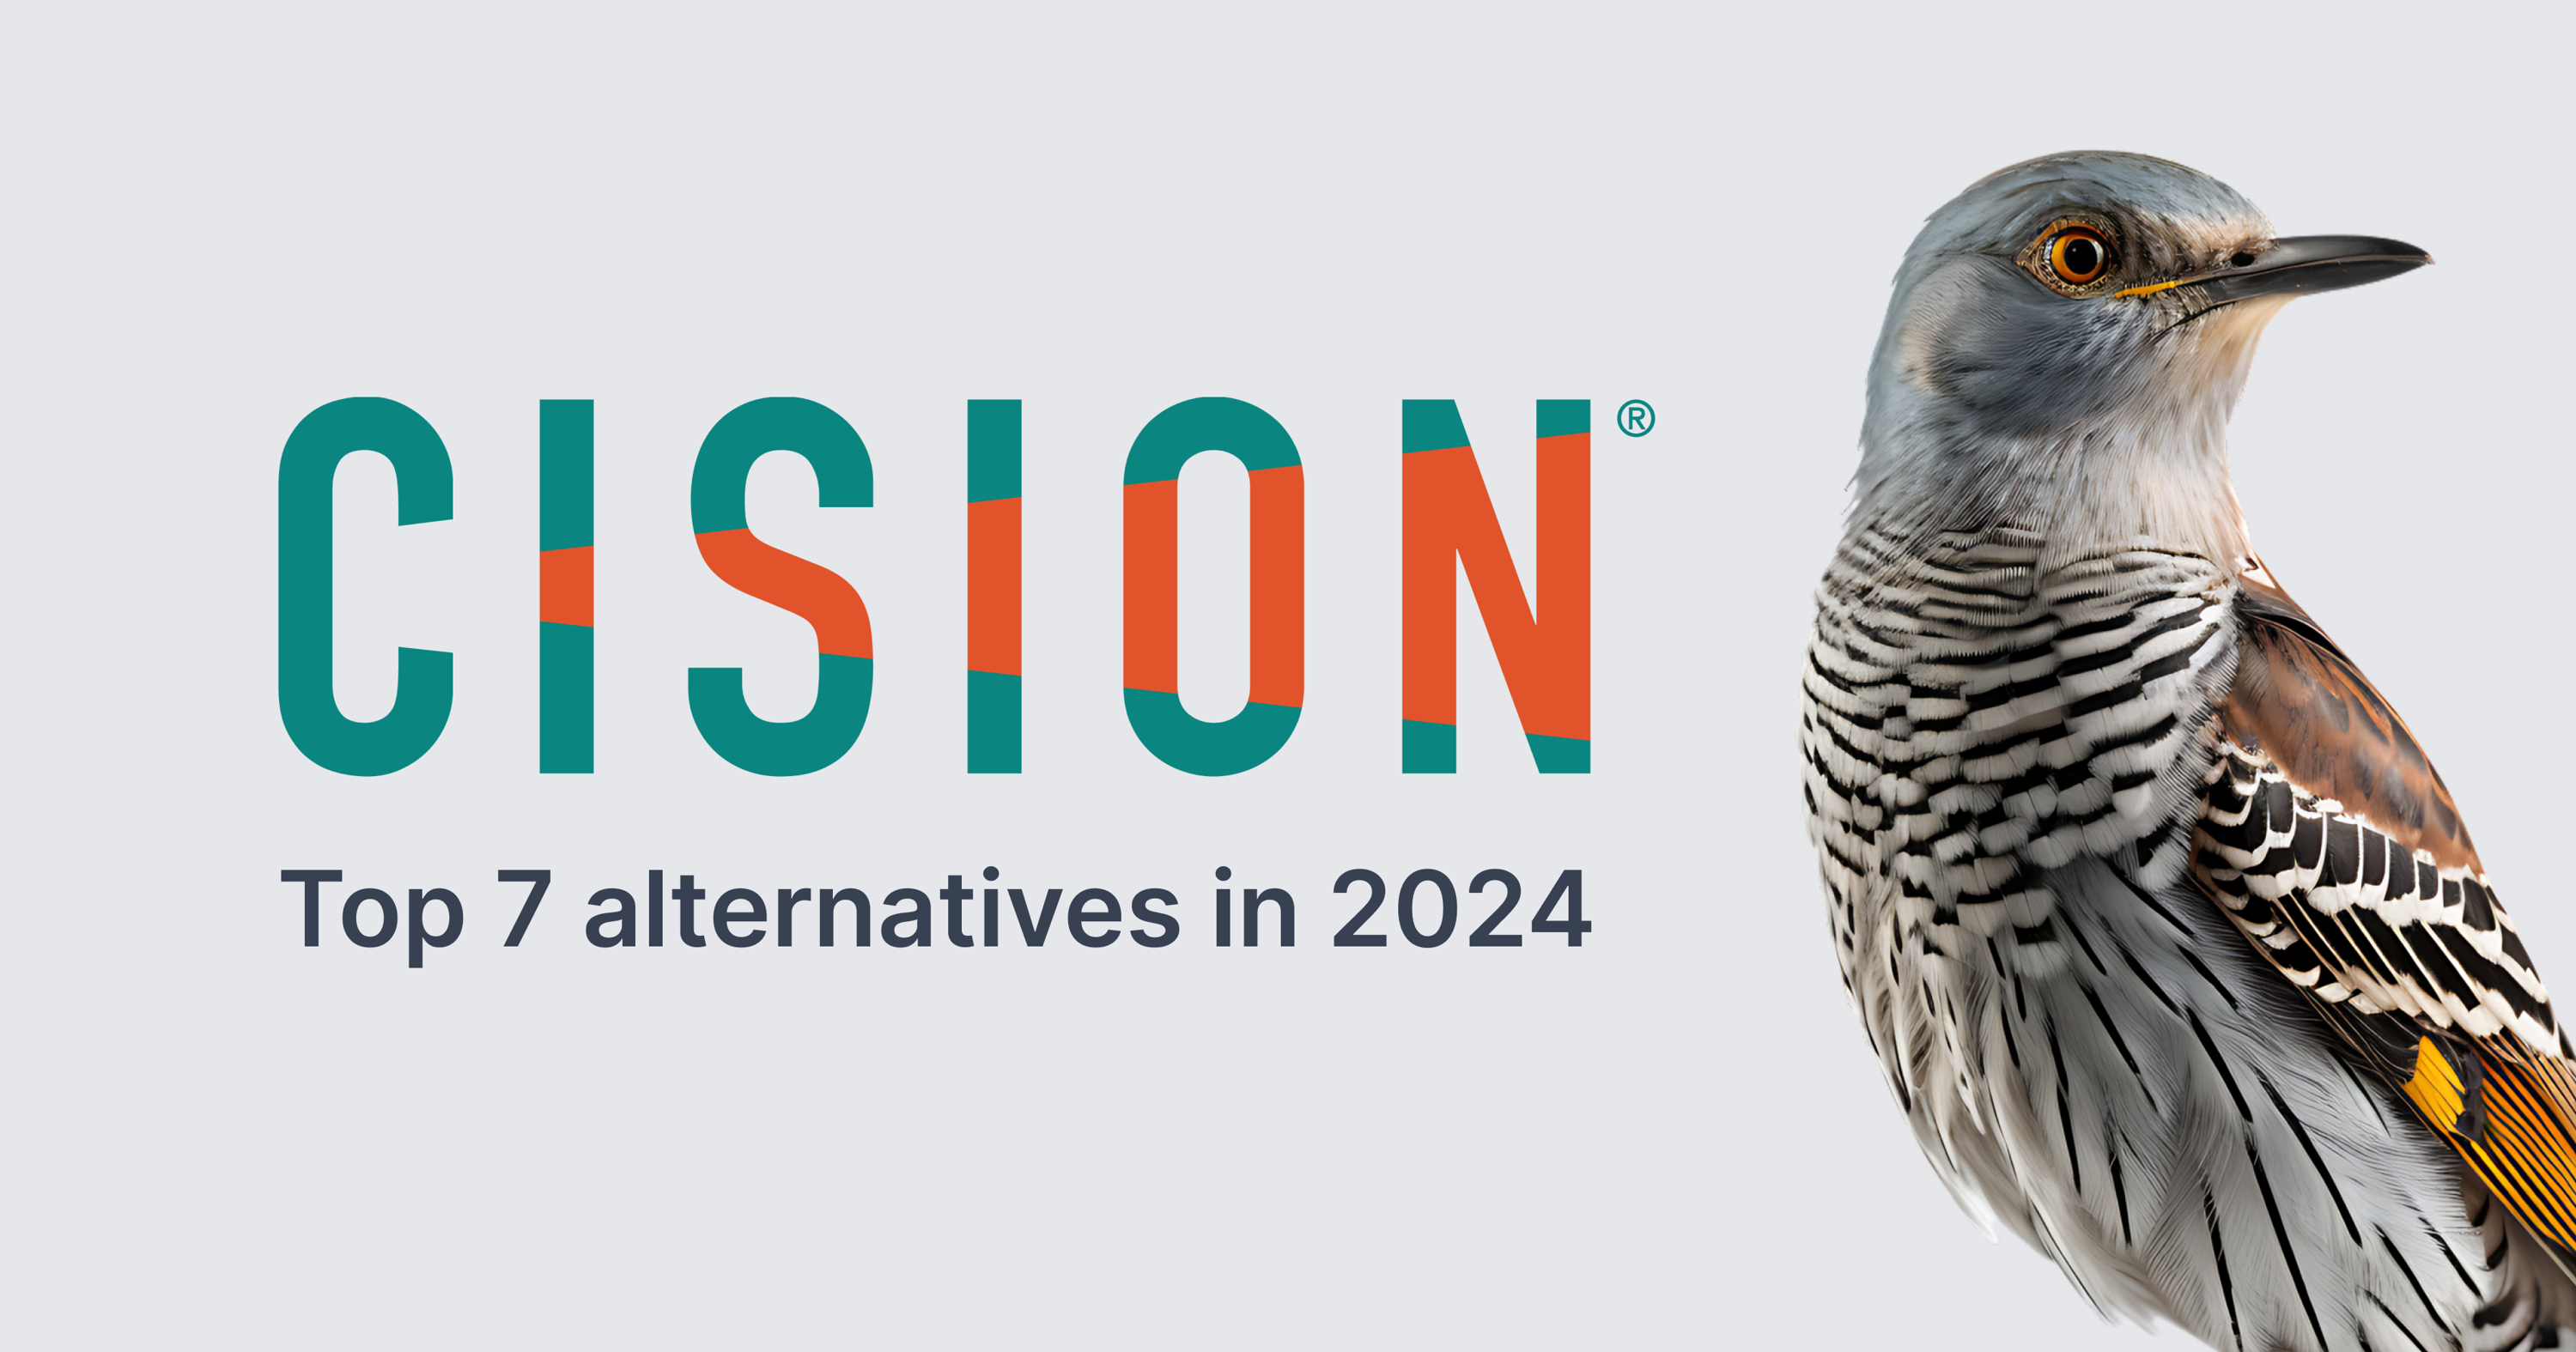 Academy: Top 7 Cision competitors & alternatives (2024)